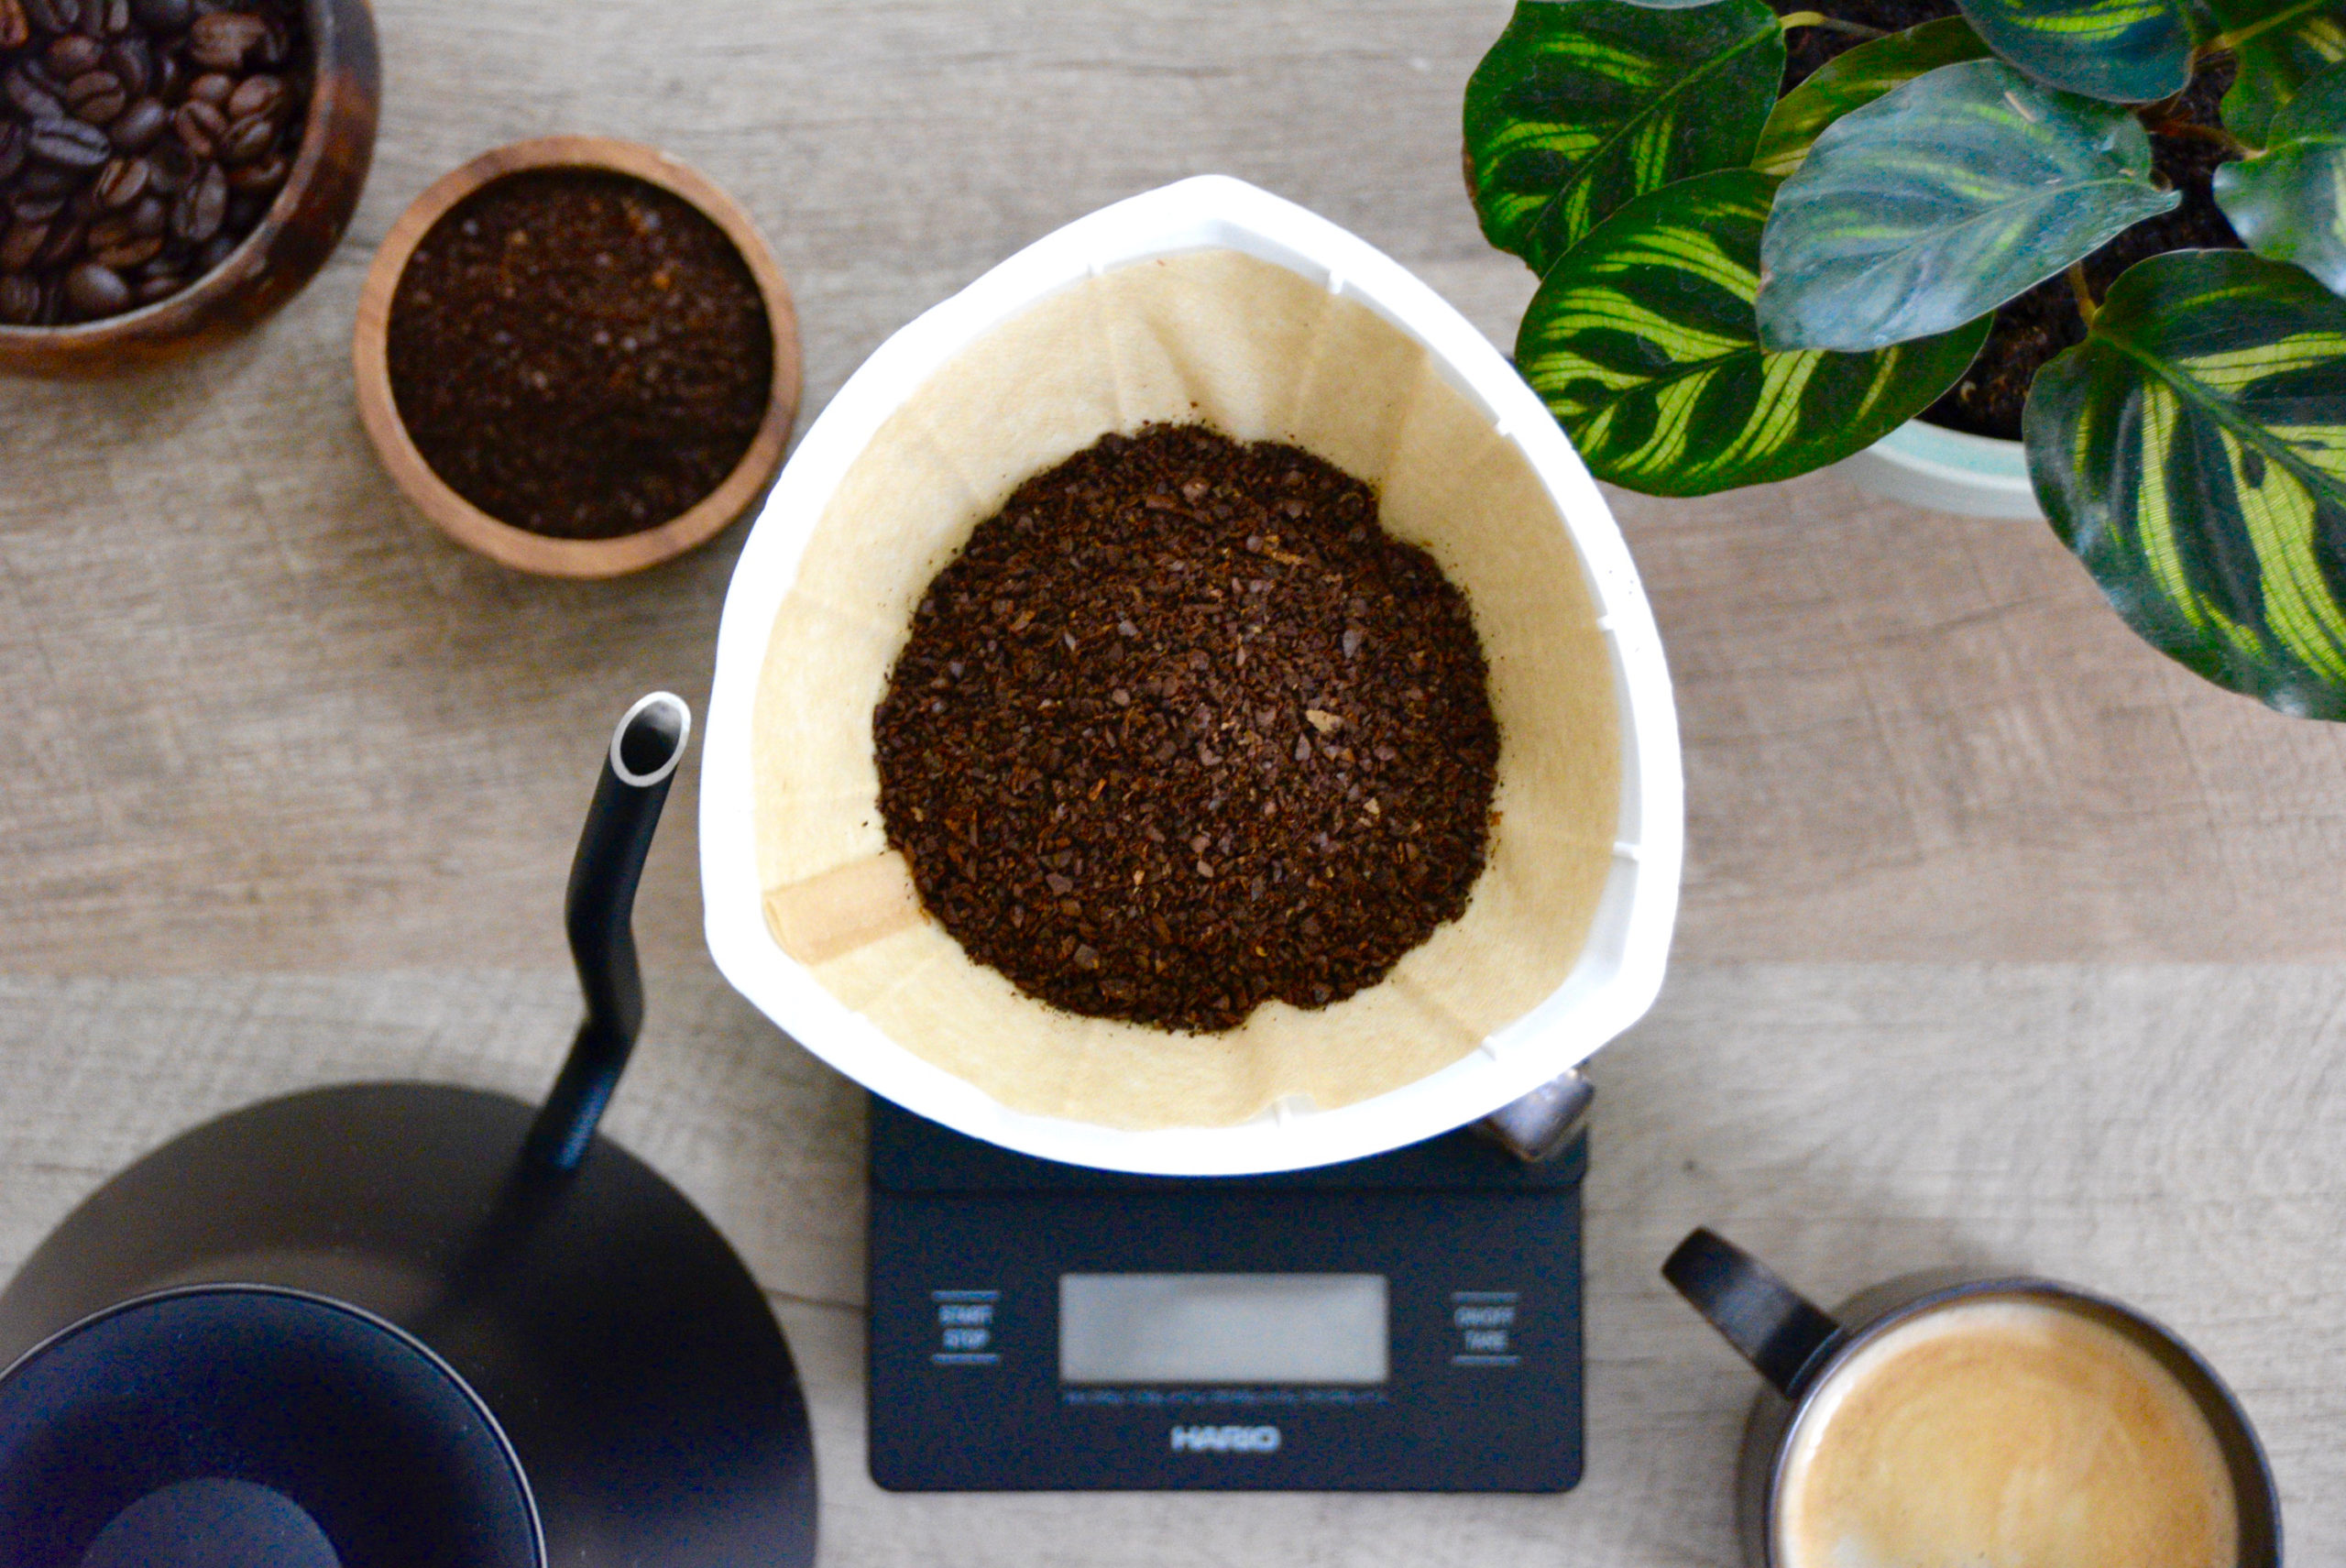 How & Why You Should Use a Scale to Brew Coffee - Baked, Brewed, Beautiful